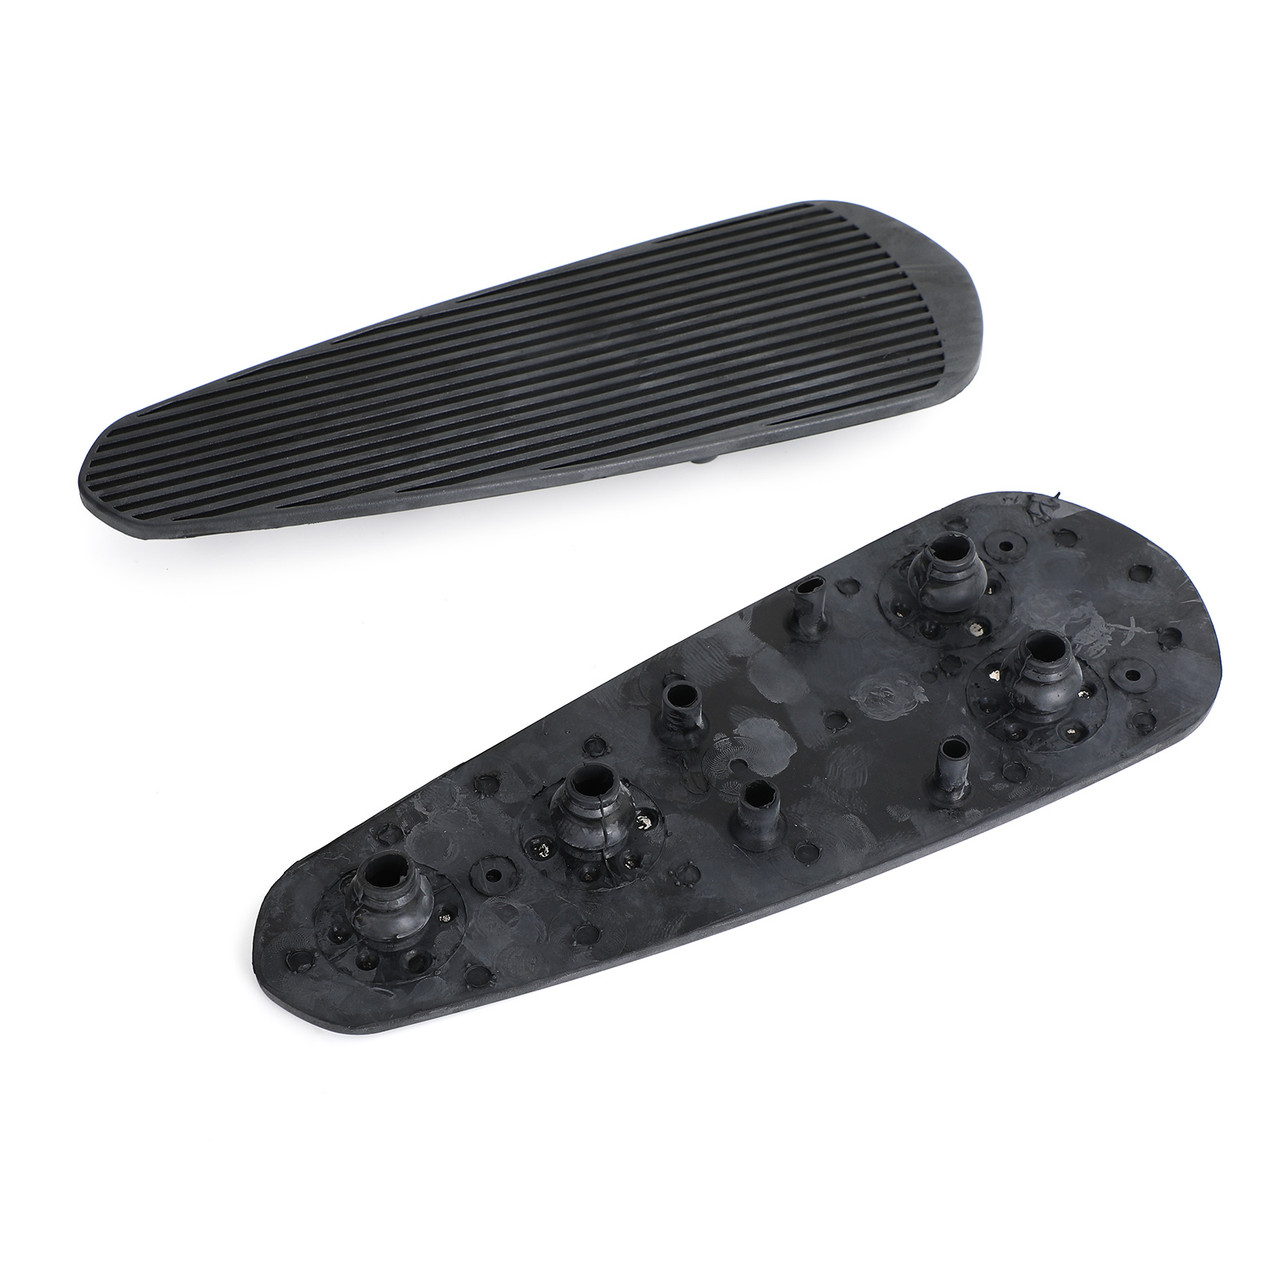 Rubber Rider Pad Footrest Footboard for Indian Chief Dark Horse Chieftain